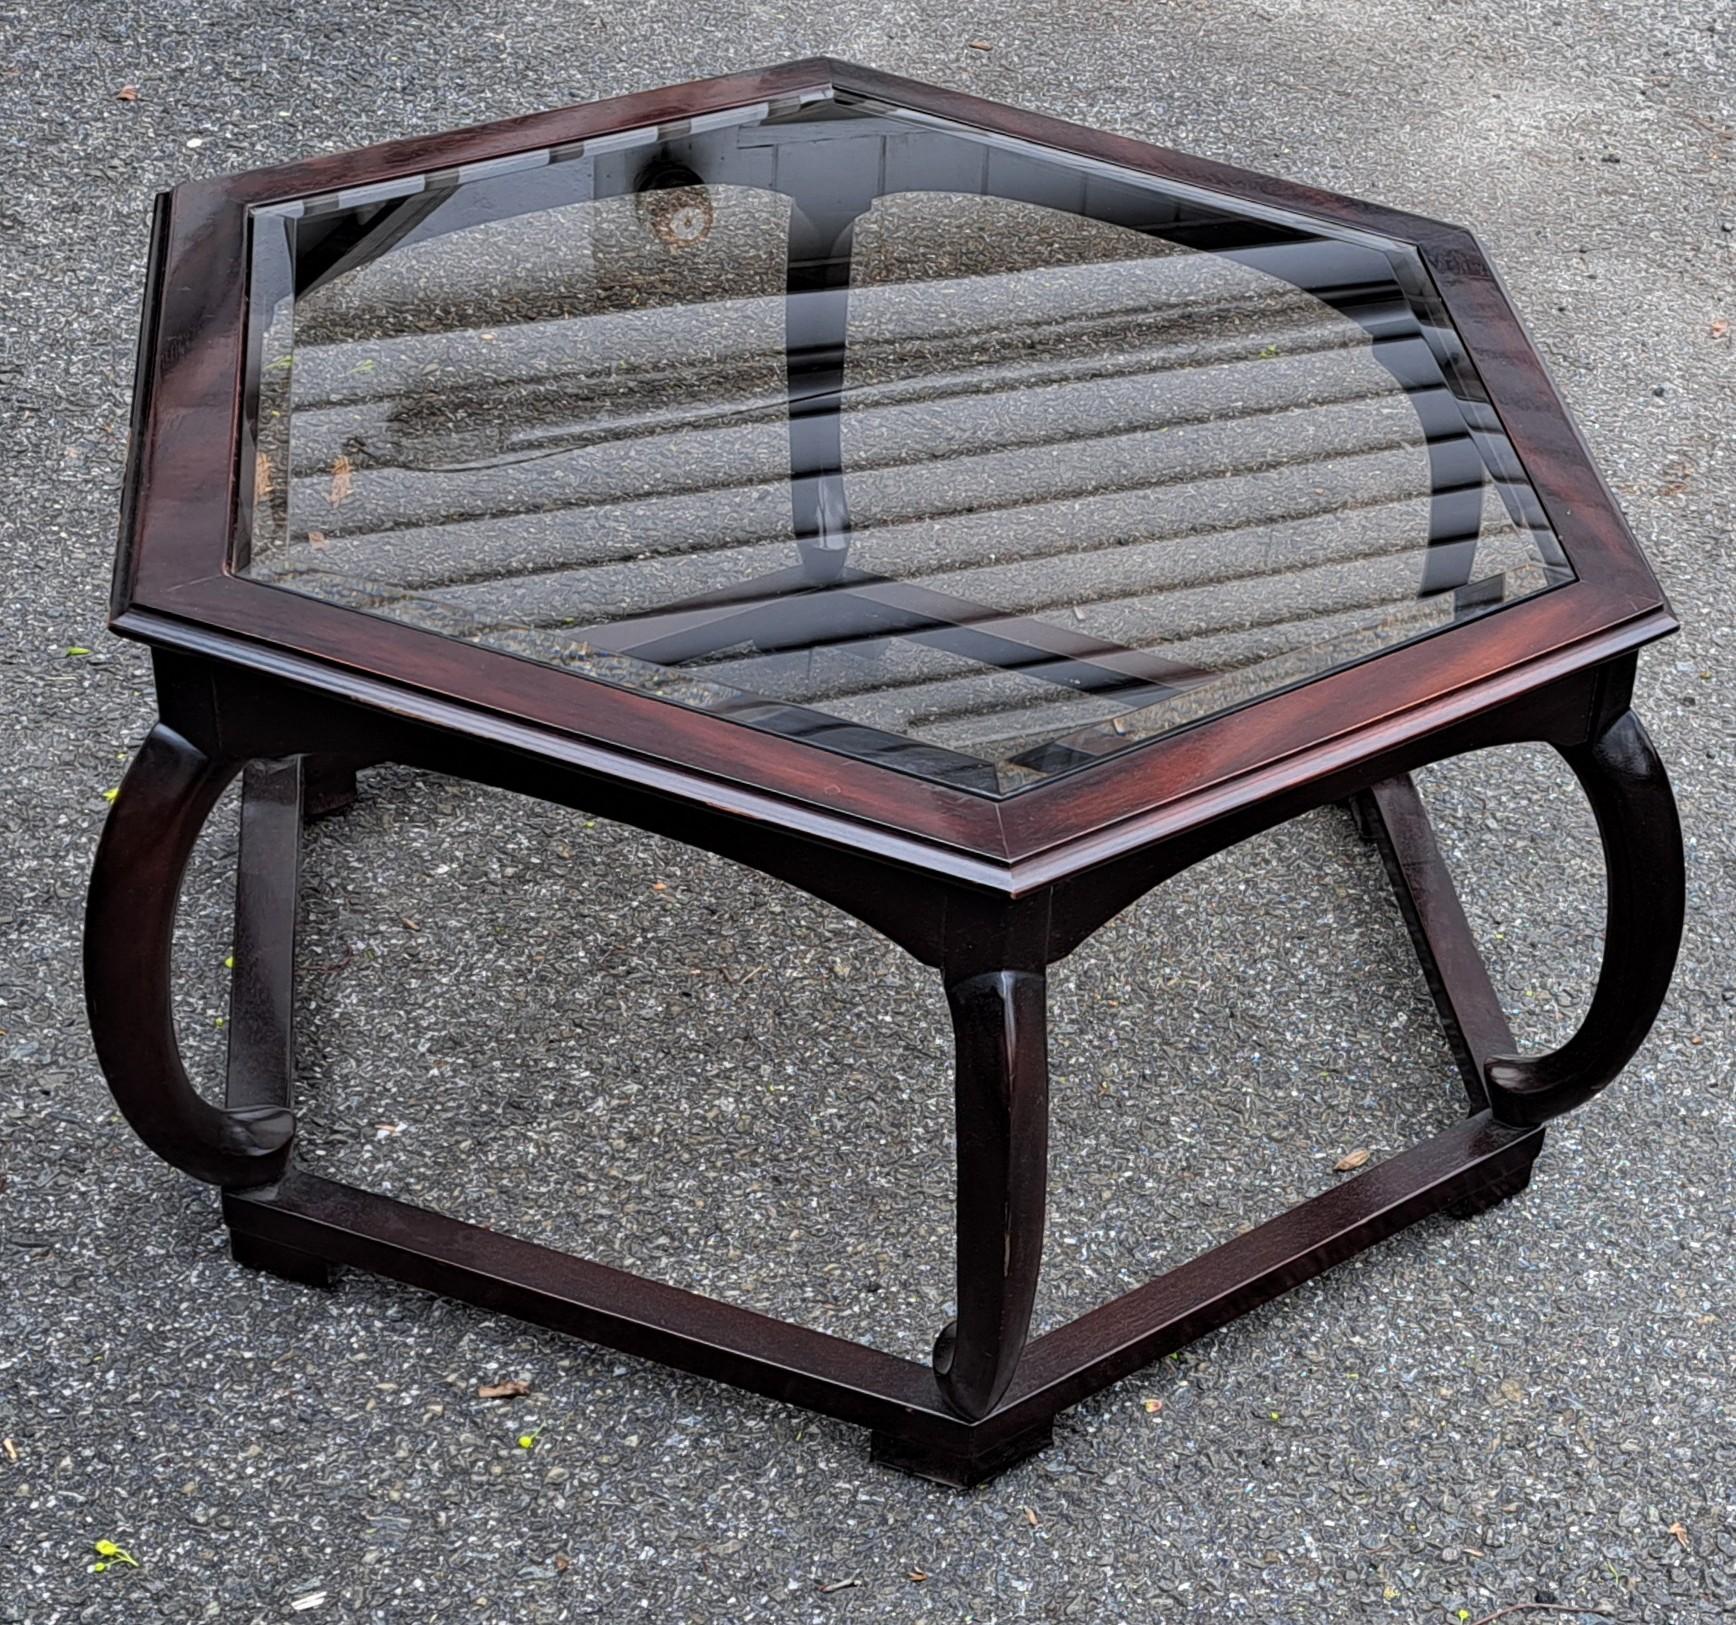 Elegant hexagonal Hollywood Regency style coffee table with custom glass top and curved supports.